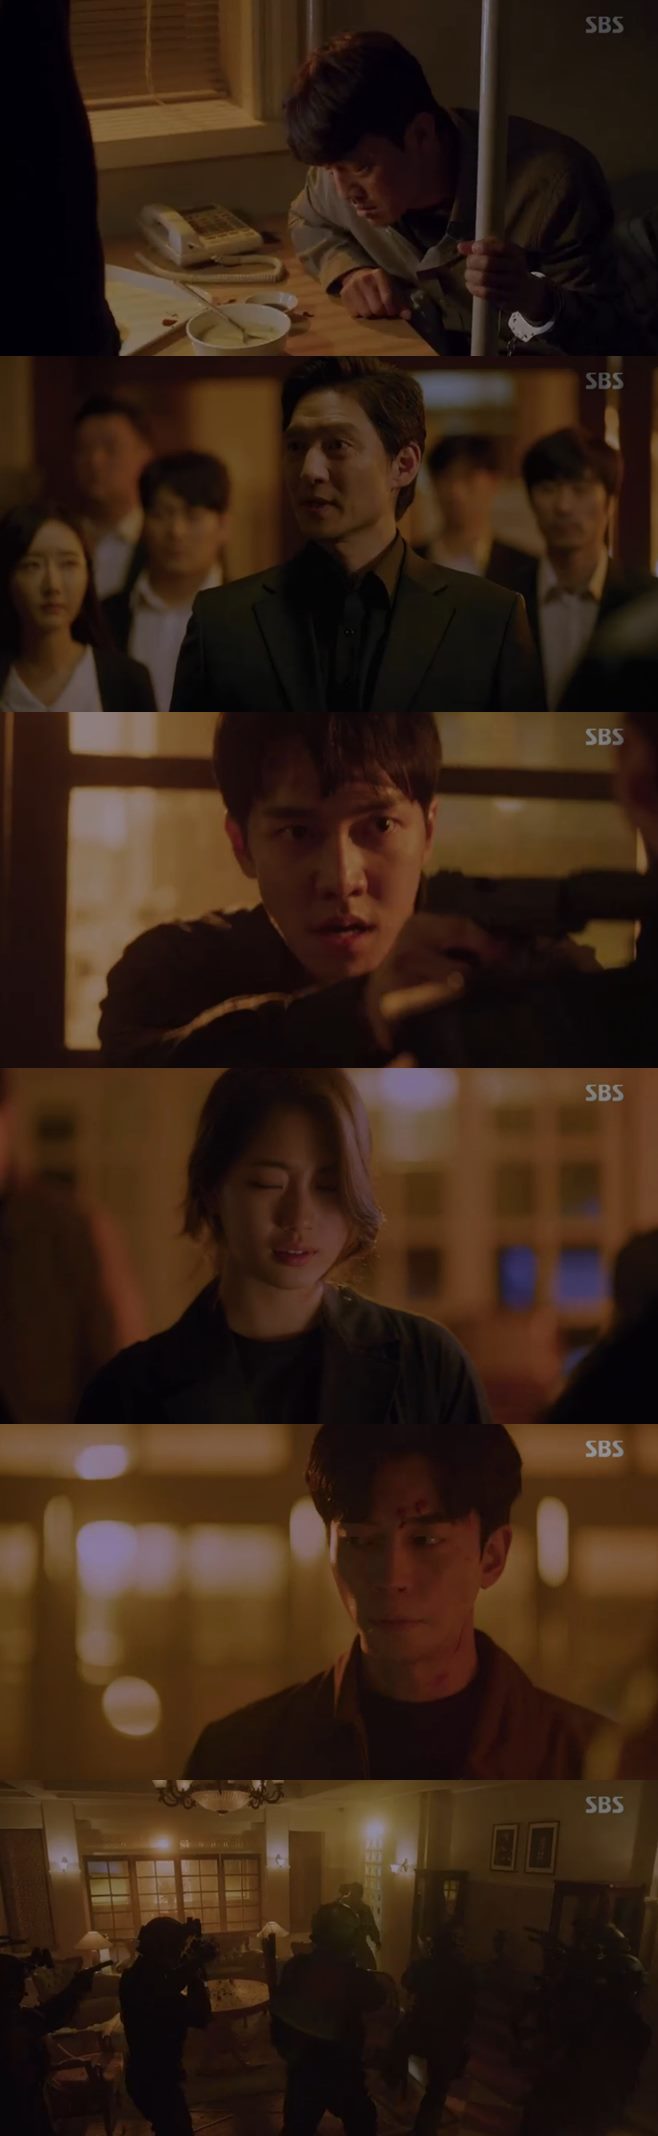 The Vagabond Jang Hyuk-jin Kyeong-heon Kang couple was driven to the limb.In the 9th episode of SBS gilt drama Vagabond (playplayed by Jang Young-cheol and director Yoo In-sik), which aired on the night of the 18th, Cha Dal-geon (Lee Seung-gi), Bae Suzy, Ki Tae-woong (Shin Sung-rok), Jessica Lee (Moon Jeong-hee), Jung Kook-pyo (Baek Yoon-sik), Hong Soon-jo (Moon Sung-geun), Edward Park (Lee Kyung-young), Kang Ju-cheol (Lee Ki-young), and Shadow The thriller social drama surrounding Yoon Han-ki (Kim Min-jong), Min Jae-sik (Jung Man-sik), Gong Hwa-sook (Hwang Bo-ra), Lilly (Park Ain), Kim If (Jang Hyuk-jin), Oh Sang-mi (Kyeong-heon Kang), and Kim Do-soo (Choi Dae-cheol) was drawn.On the day of the broadcast, John & Mark Jessica Lee threatened Kim ifs wife Oh Sang-mis life to overthrow the situation.Jessica Lee urged Oh to falsely testify that there was a dynamic company, not John & Mark, behind the plane terrorist accident.Dynamic has offered me 10 billion won in return for testifying that I received a buyout from John & Mark, Oh said, manipulating the situation according to Jessica Lees scenario.Among them, Cha Dal-geon met Kim if overseas and succeeded in catching him alive. Cha Dal-geon grinded his teeth and watched Kim if.But the NIS sent Hwang to watch Kim if. Dalgan did not slow down the suspicion to Hwang with his animal instincts.In fact, Hwang was working on a plan to kill the Dalgun, and Ko Hae-ri stopped him and went to the room where Hwang stayed and noticed a strange feeling.Hwang immediately shot at the door to Chadalgun outside the door, who engaged in a gunfight with a grenade, while the confession stole Kim if.